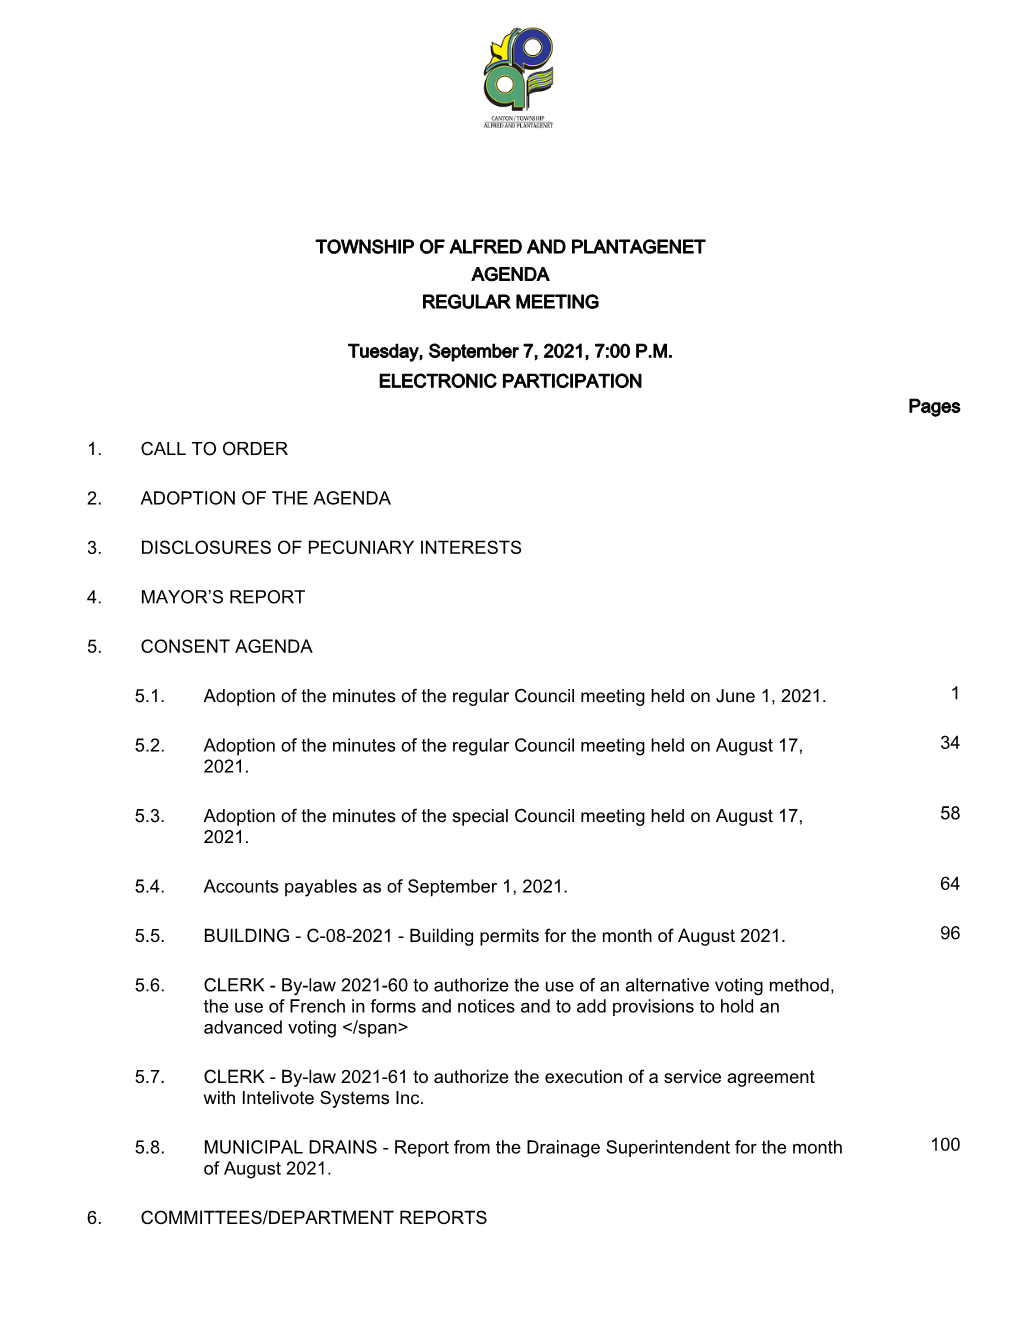 Township of Alfred and Plantagenet Agenda Regular Meeting